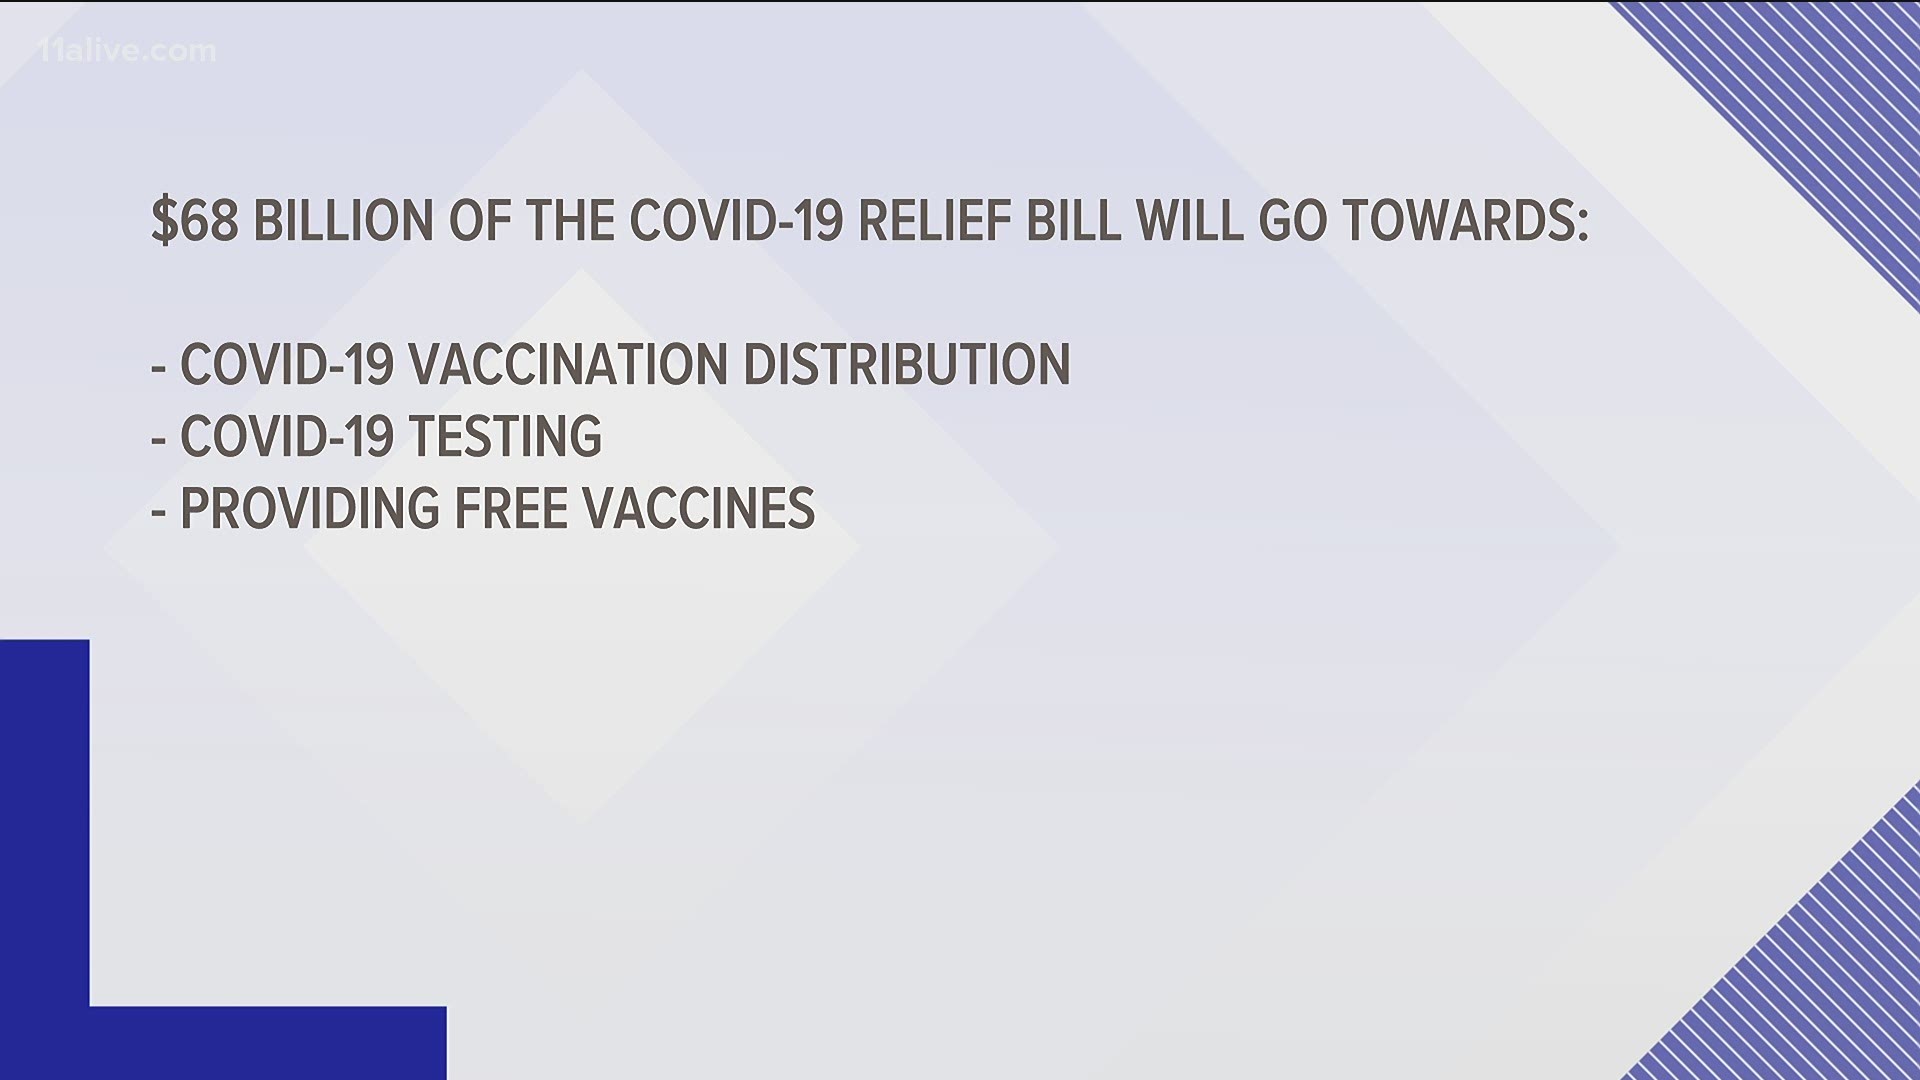 Relief for healthcare systems could be on the way through the COVID-19 relief bill.